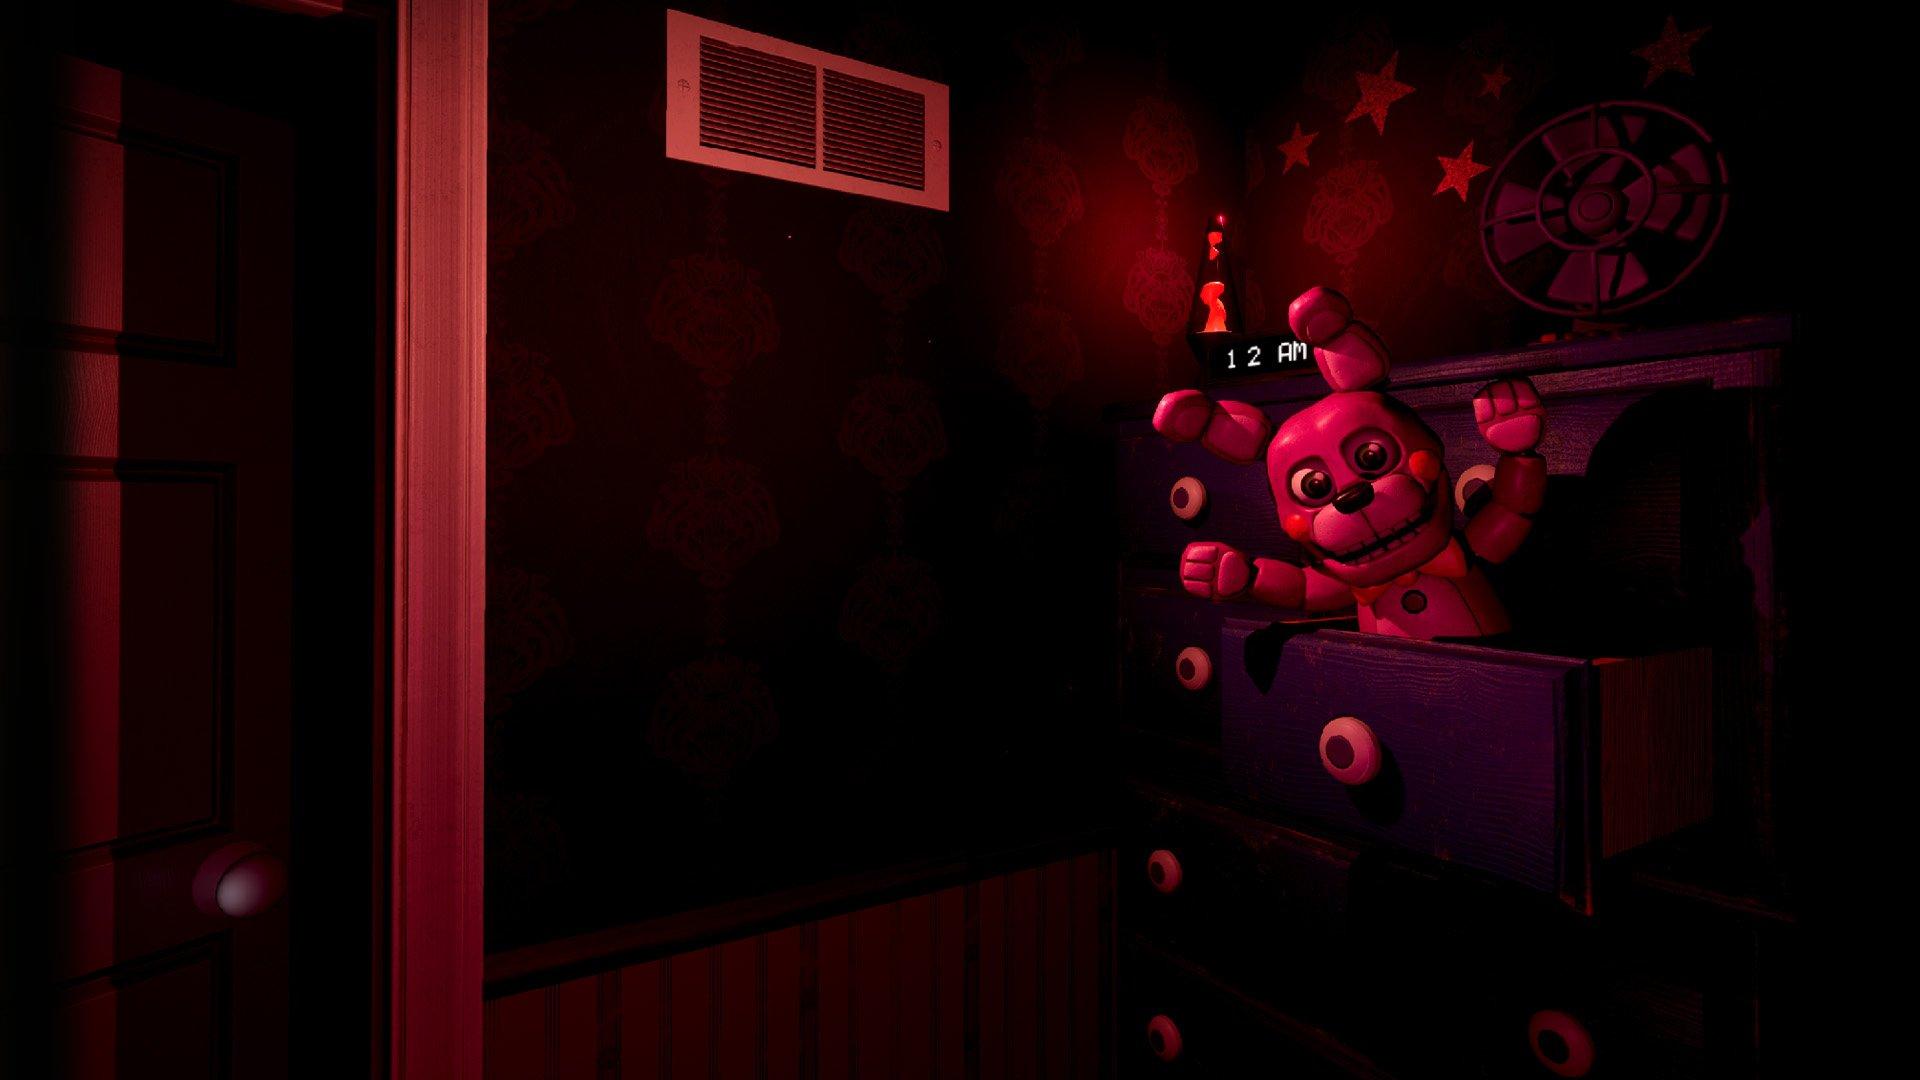 Five Nights At Freddys Help Wanted Nintendo Switch